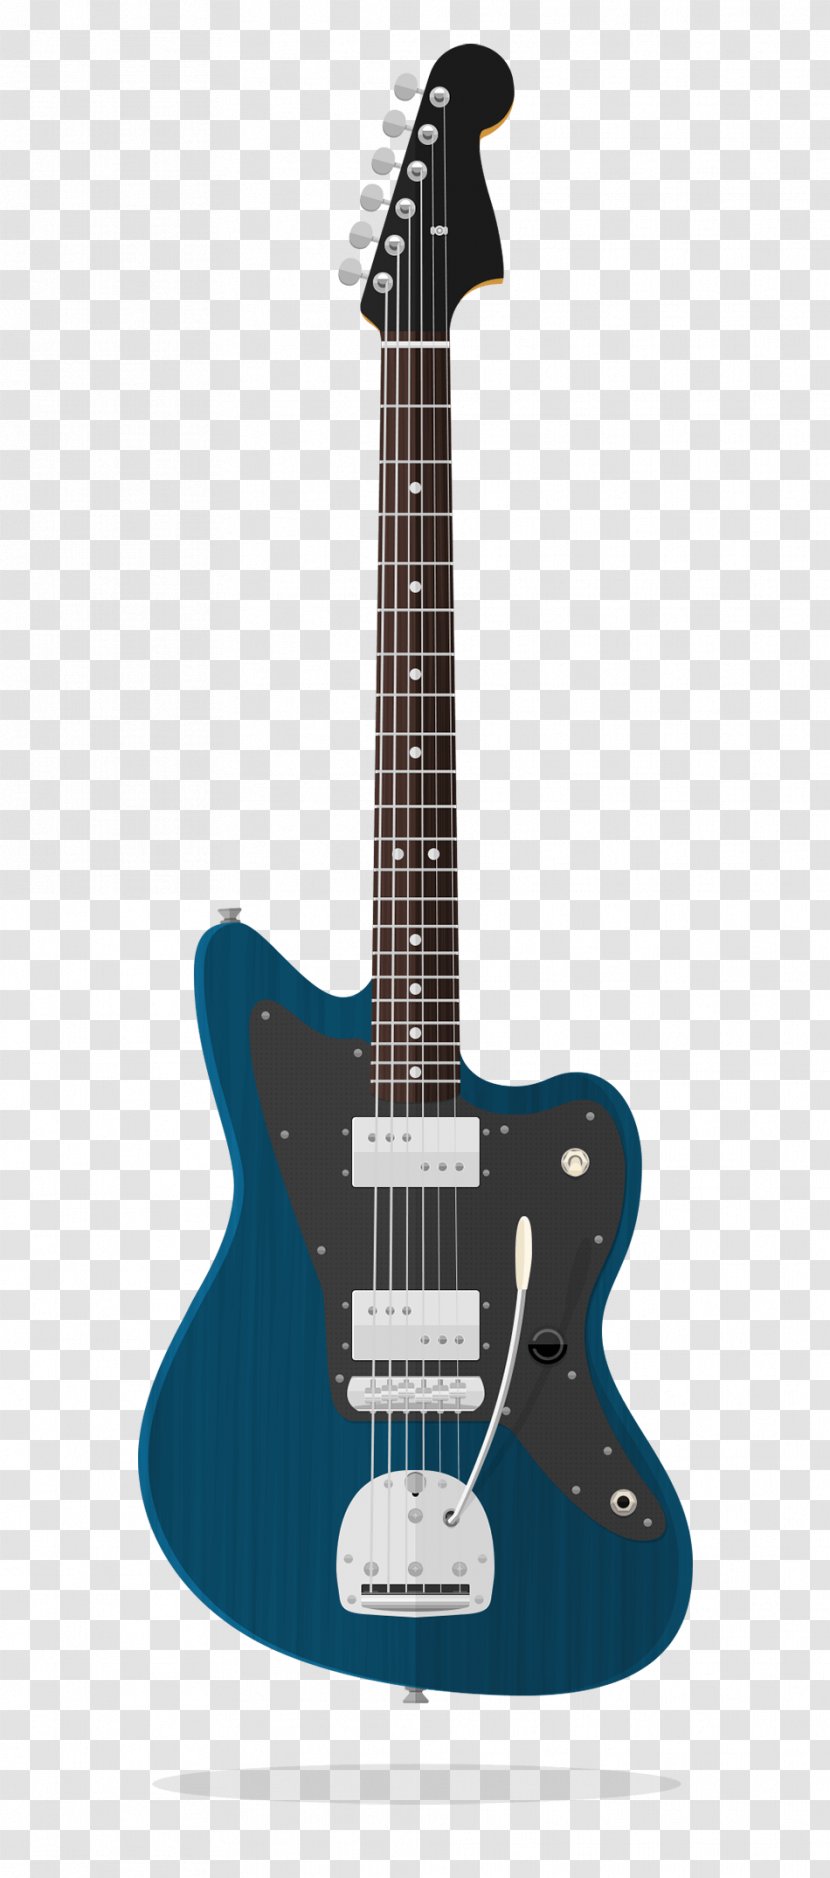 Electric Guitar Fender Jazzmaster California Series Stratocaster Acoustic - Steelstring Transparent PNG